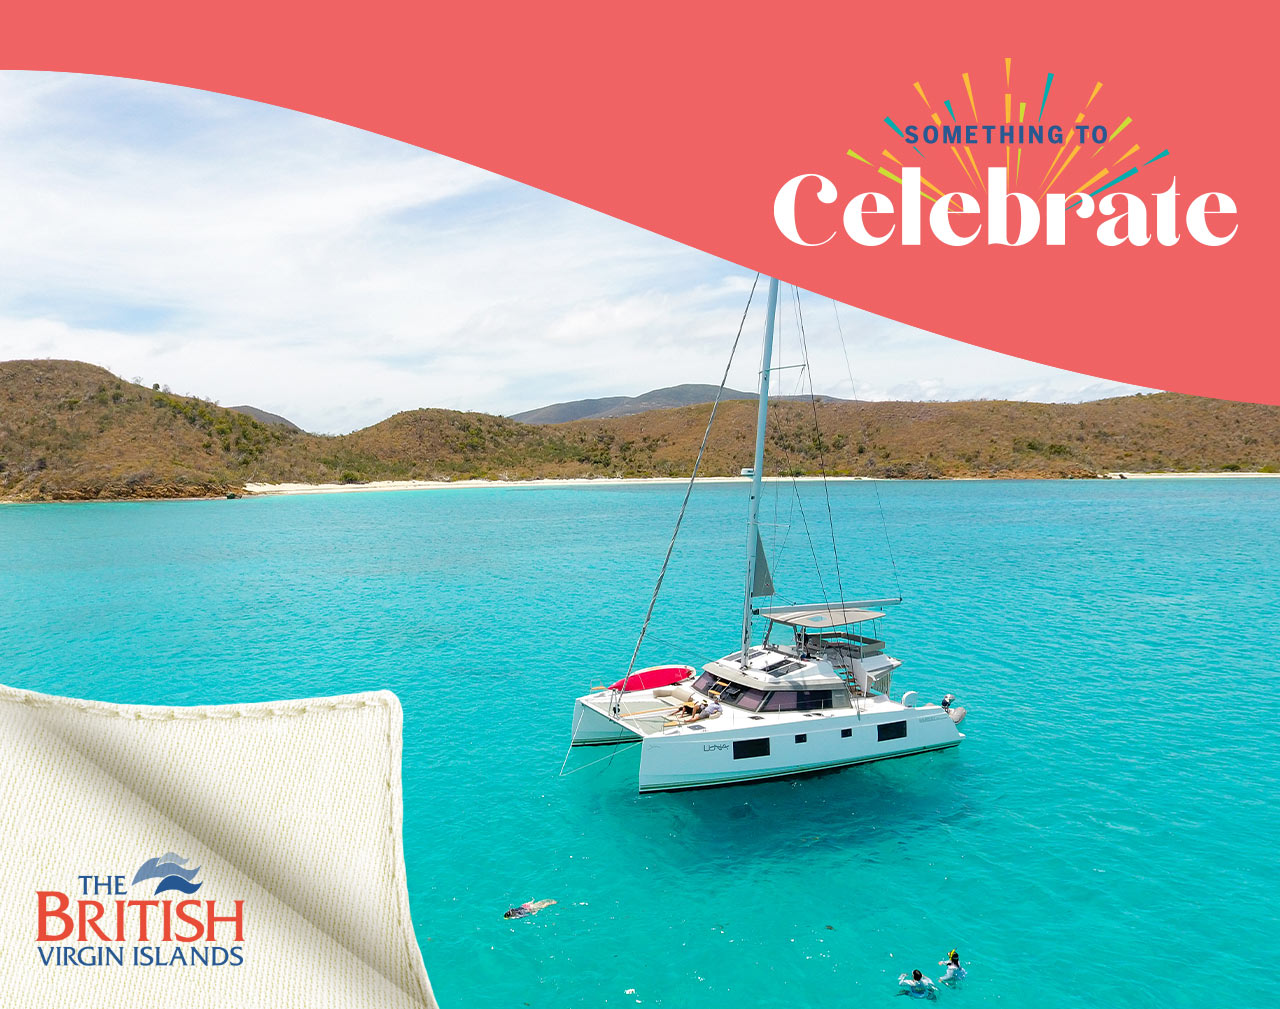 Something to Celebrate - A sailboat in the gorgeous blue waters at the British Virgin Islands.